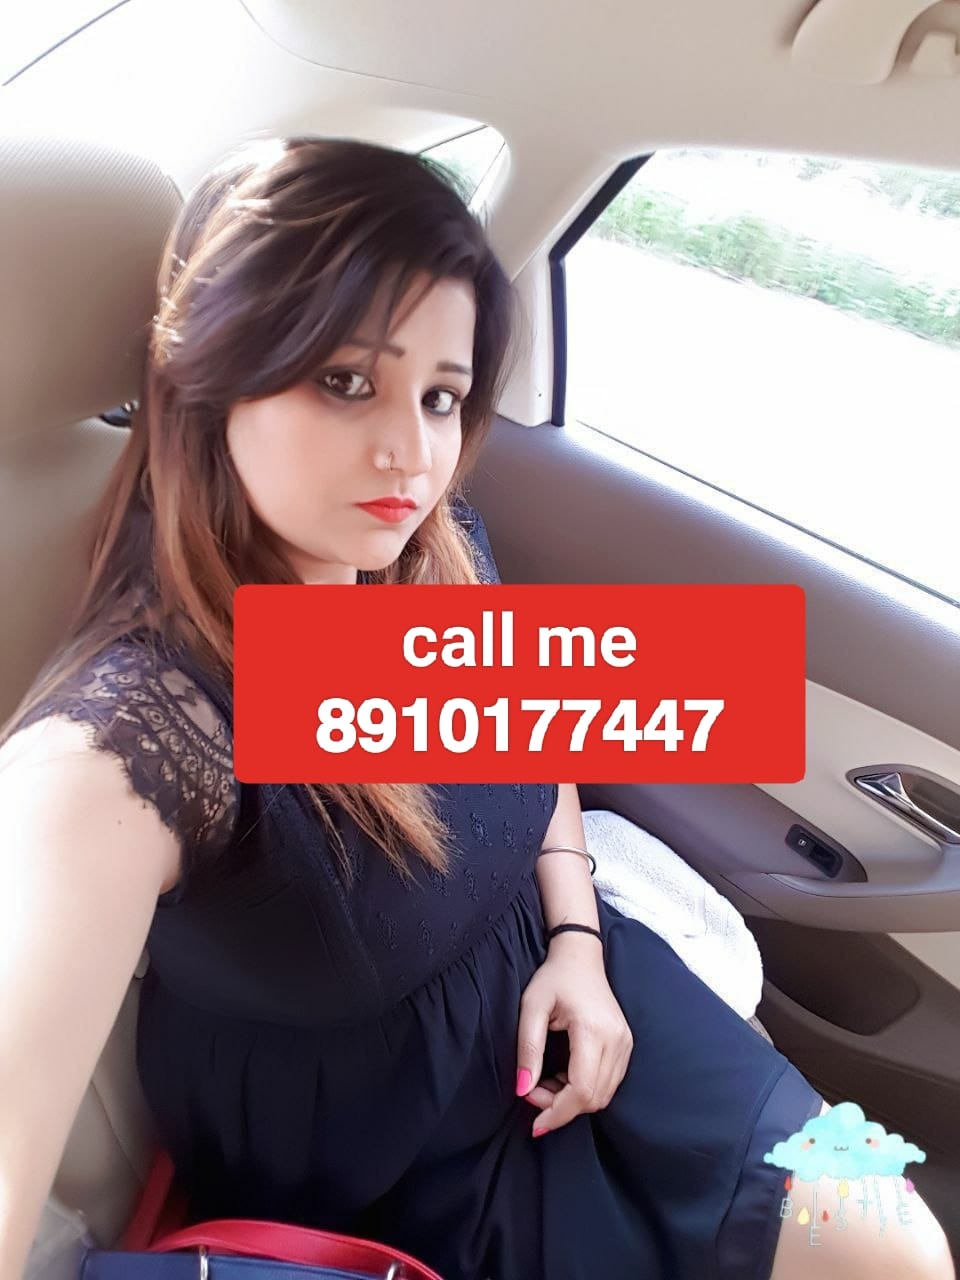 Dum dum trusted genuine safe and secure college girls service 